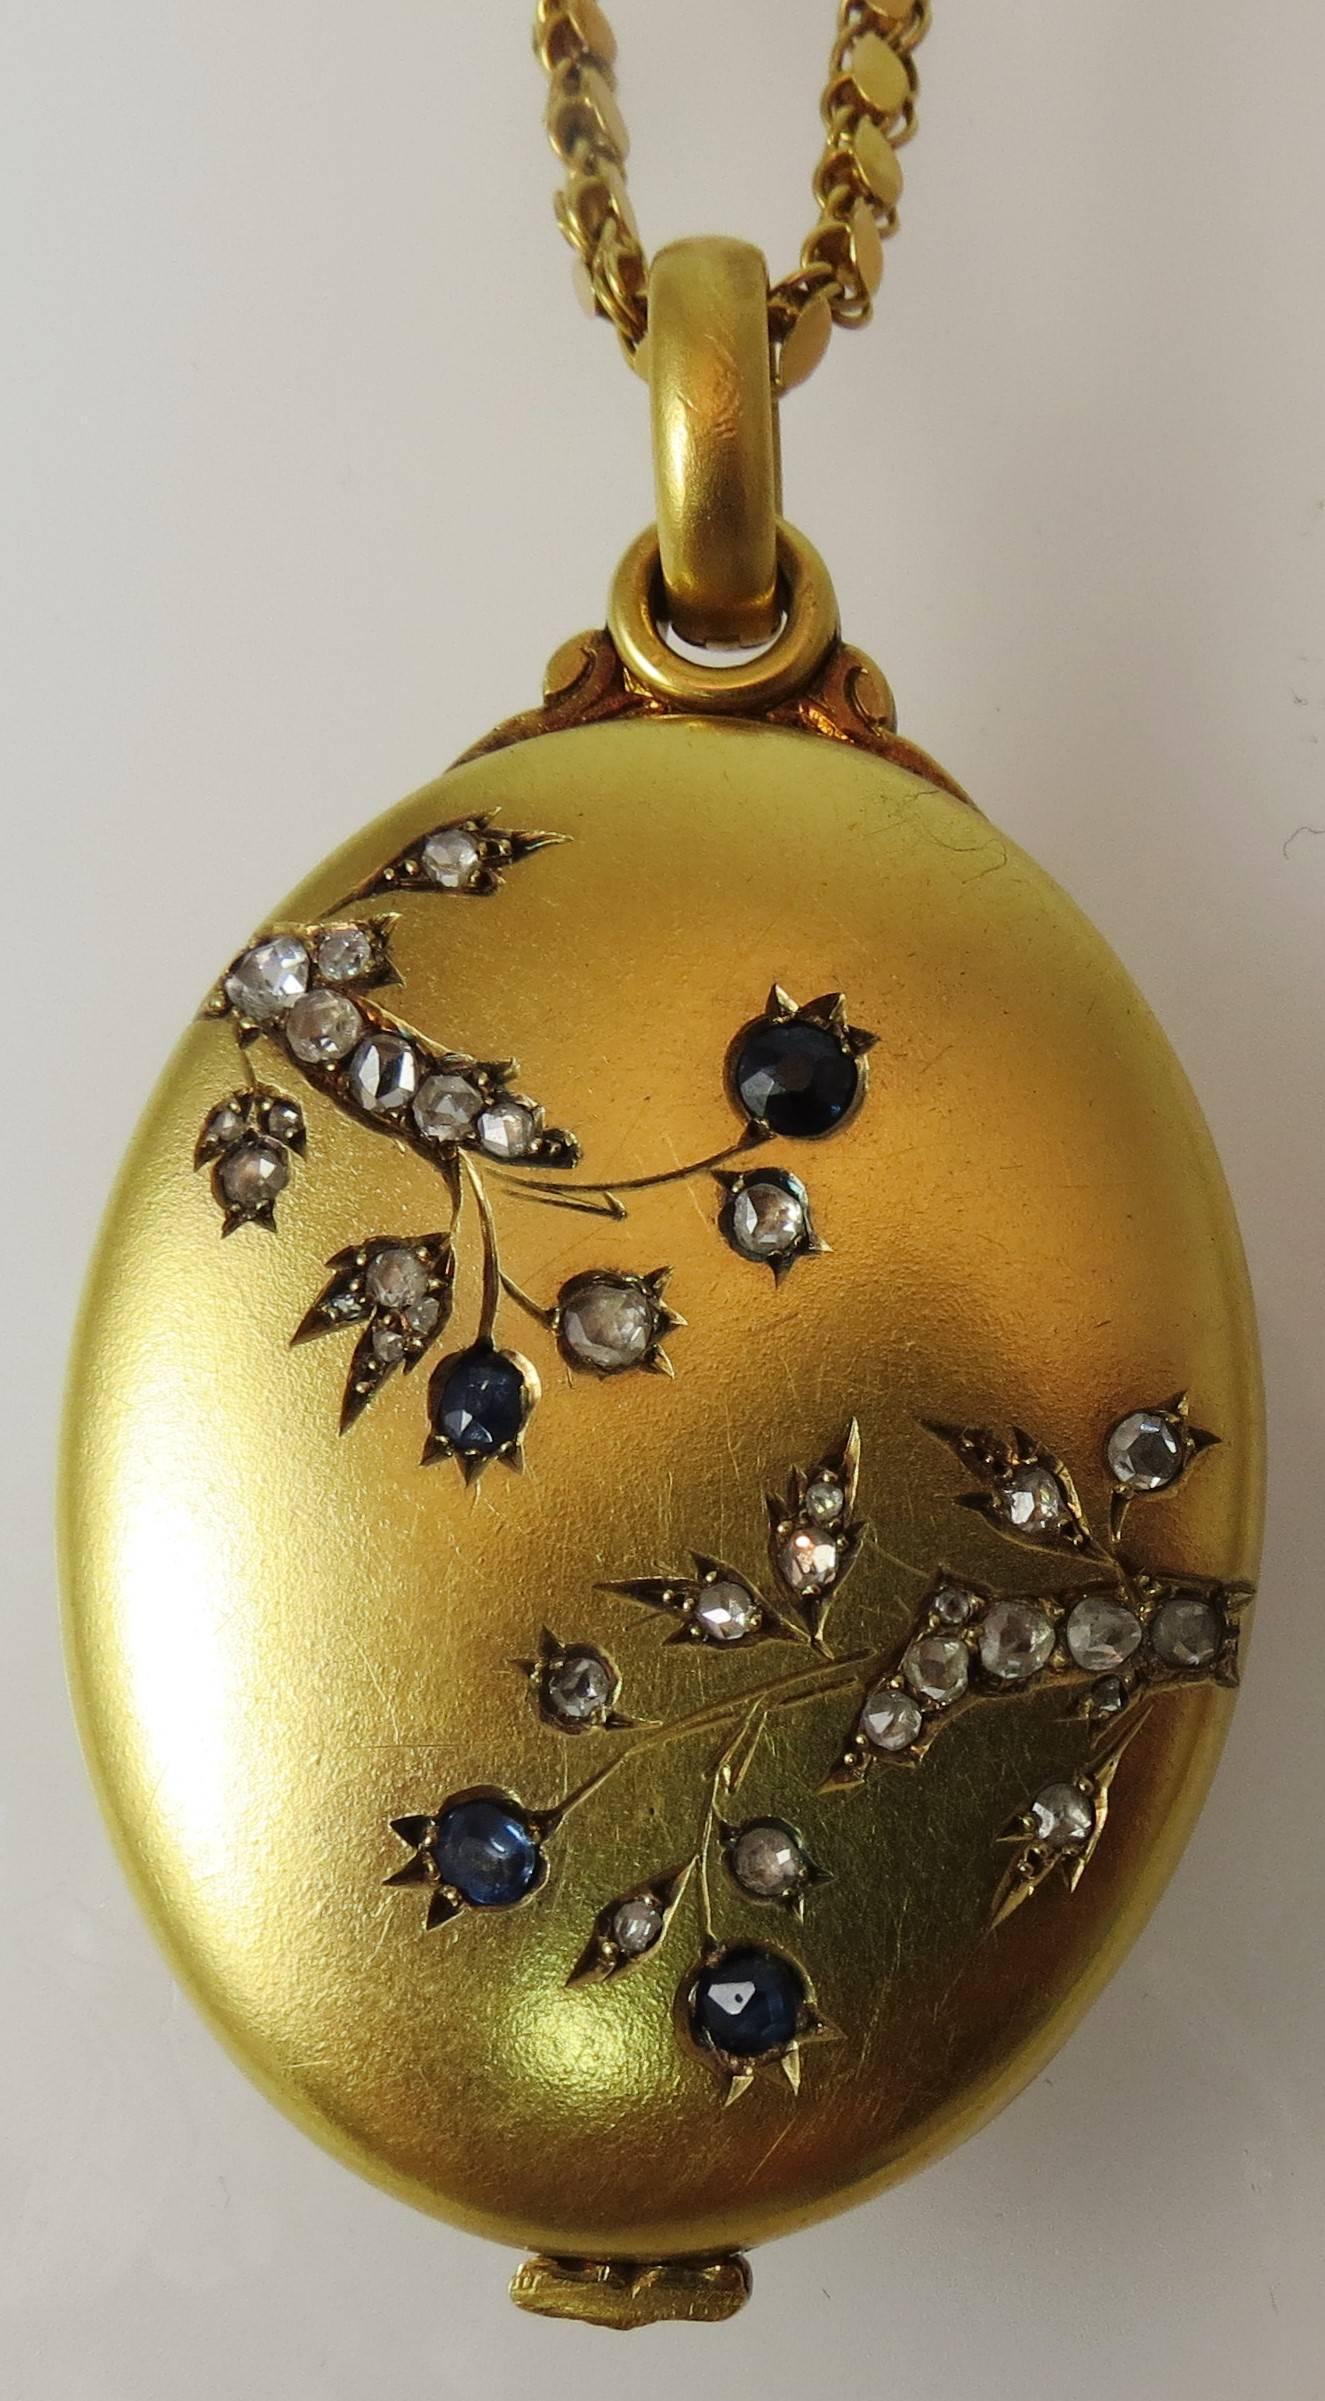 Beautiful Vintage 18K yellow gold oval locket, with floral motif, set with 31 rose cut diamonds and 4 rose cut blue sapphires, monogram engraved on back suspended from 18K yellow gold vintage chain, 31 inches long. Can be sold individually.